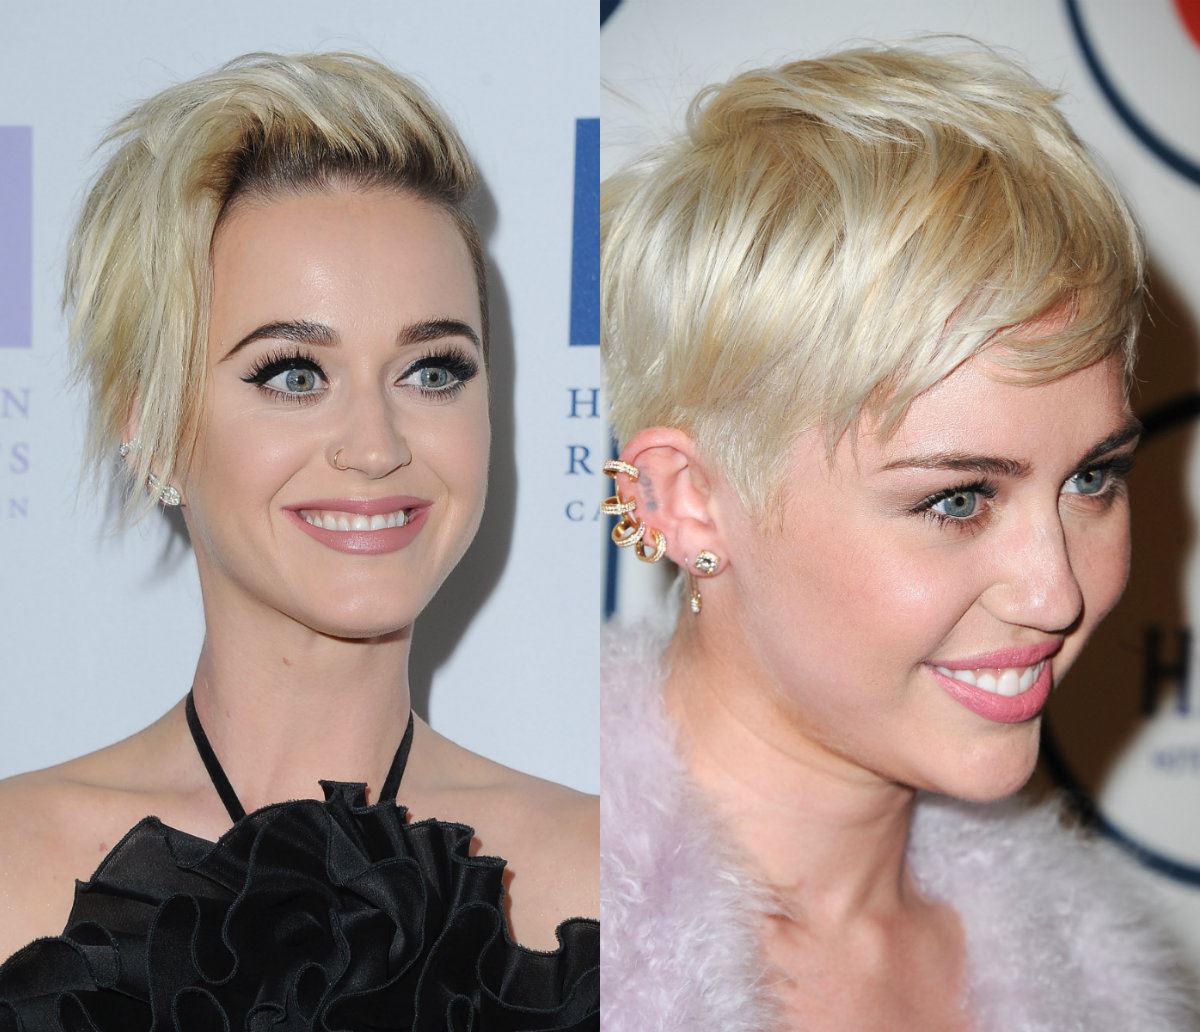 **Katy Perry and Miley Cyrus**

With her adorable pixie 'do, we think Katy Perry is a dead ringer for Miley back when she had short platinum locks!